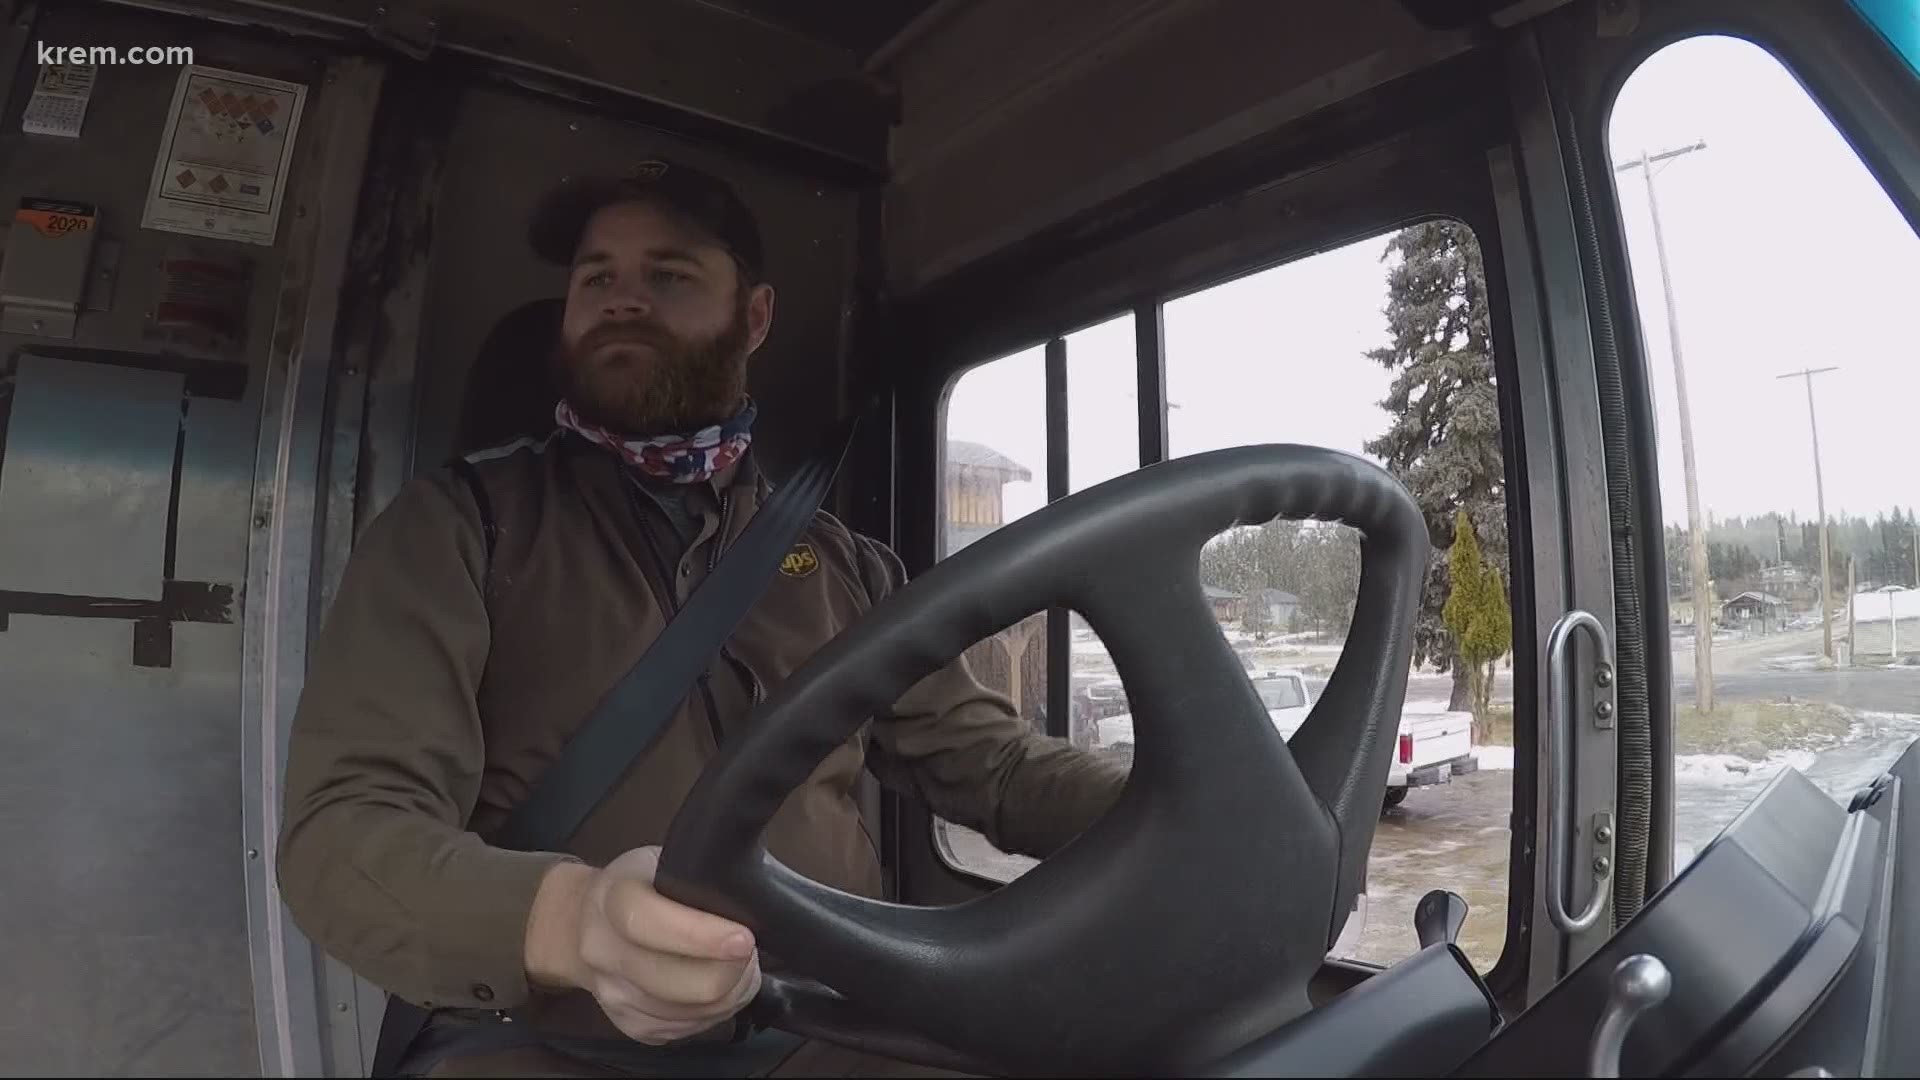 Levi Souder was driving a route he often does on an icy Spokane morning, when he heard a woman call out for help. His decision to act saved her life.